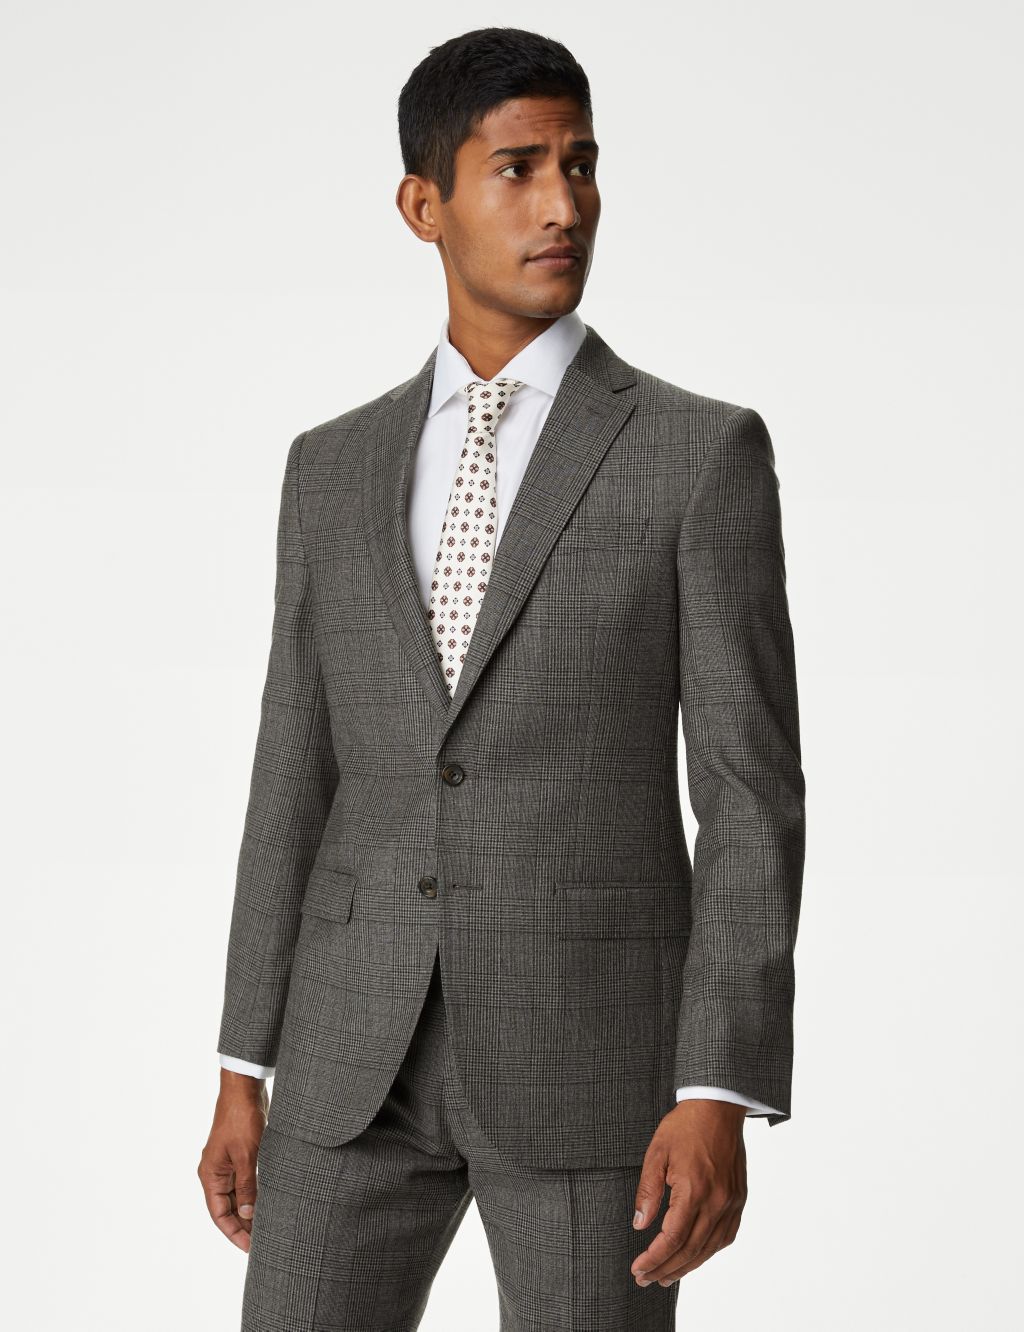 Tailored Fit British Wool Suit image 2